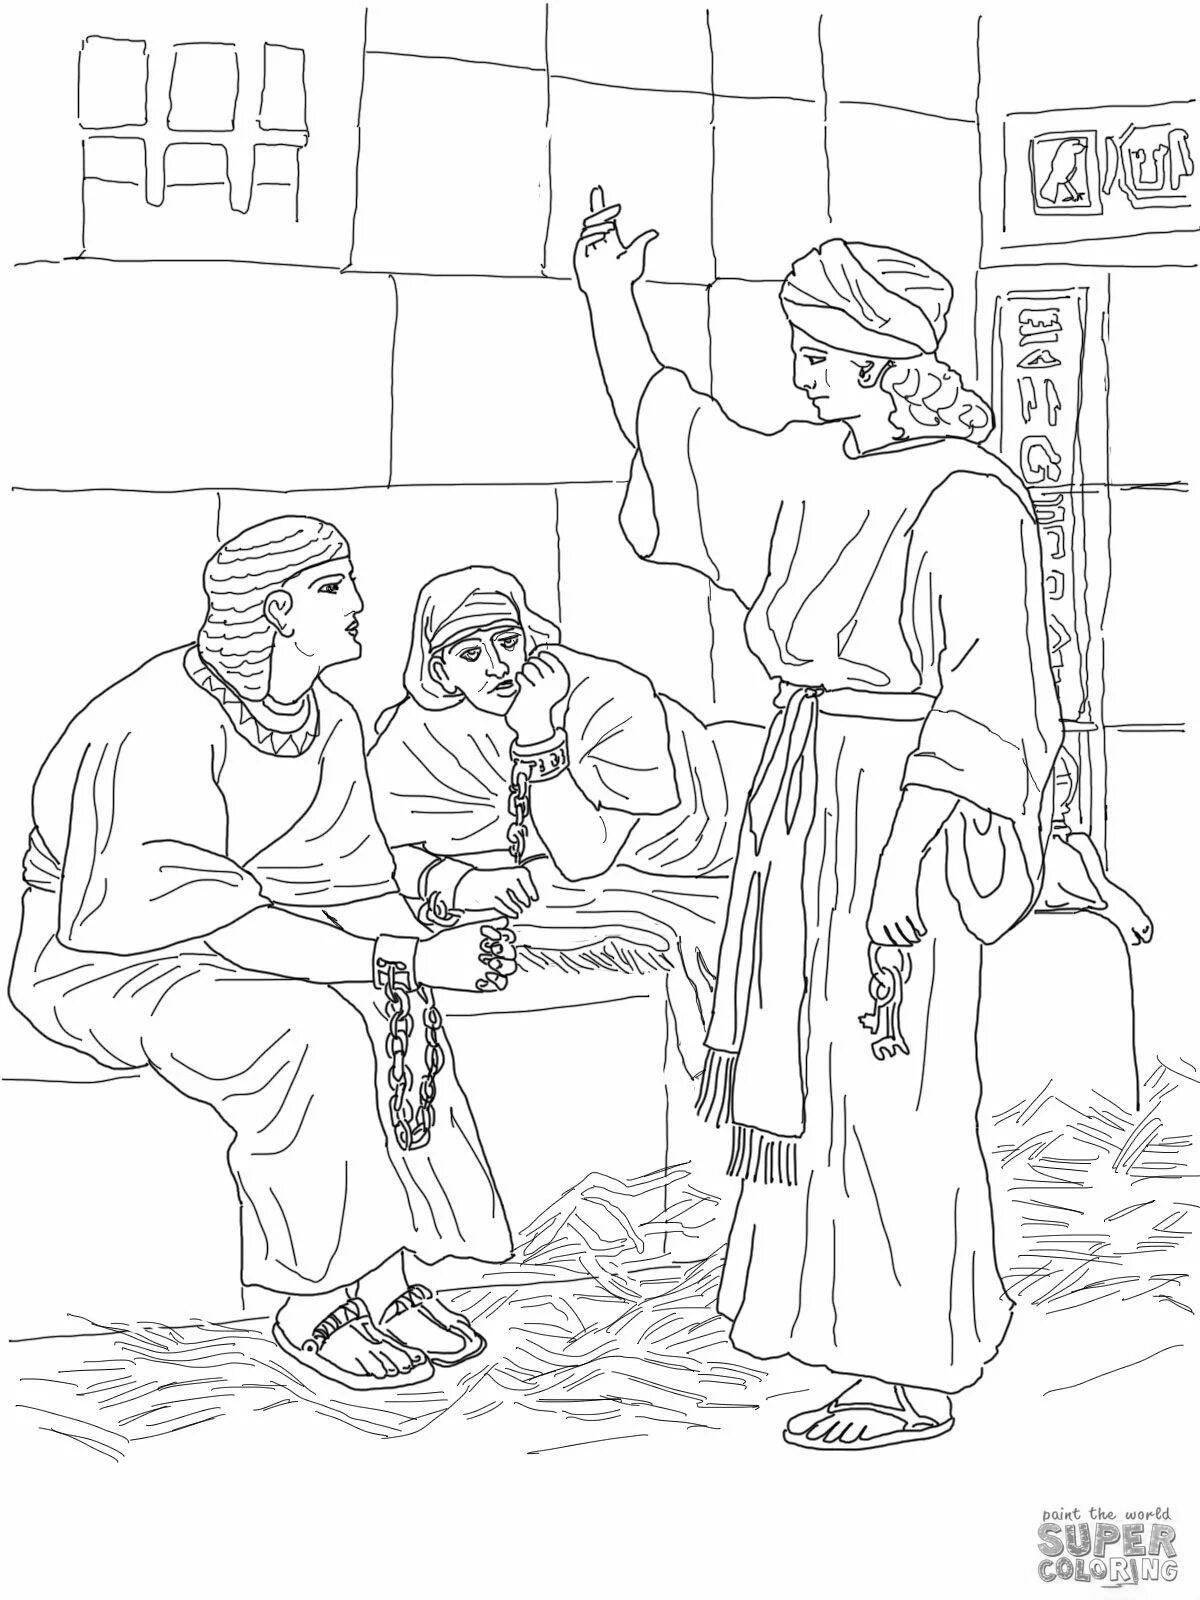 Charm of joseph in egypt coloring book